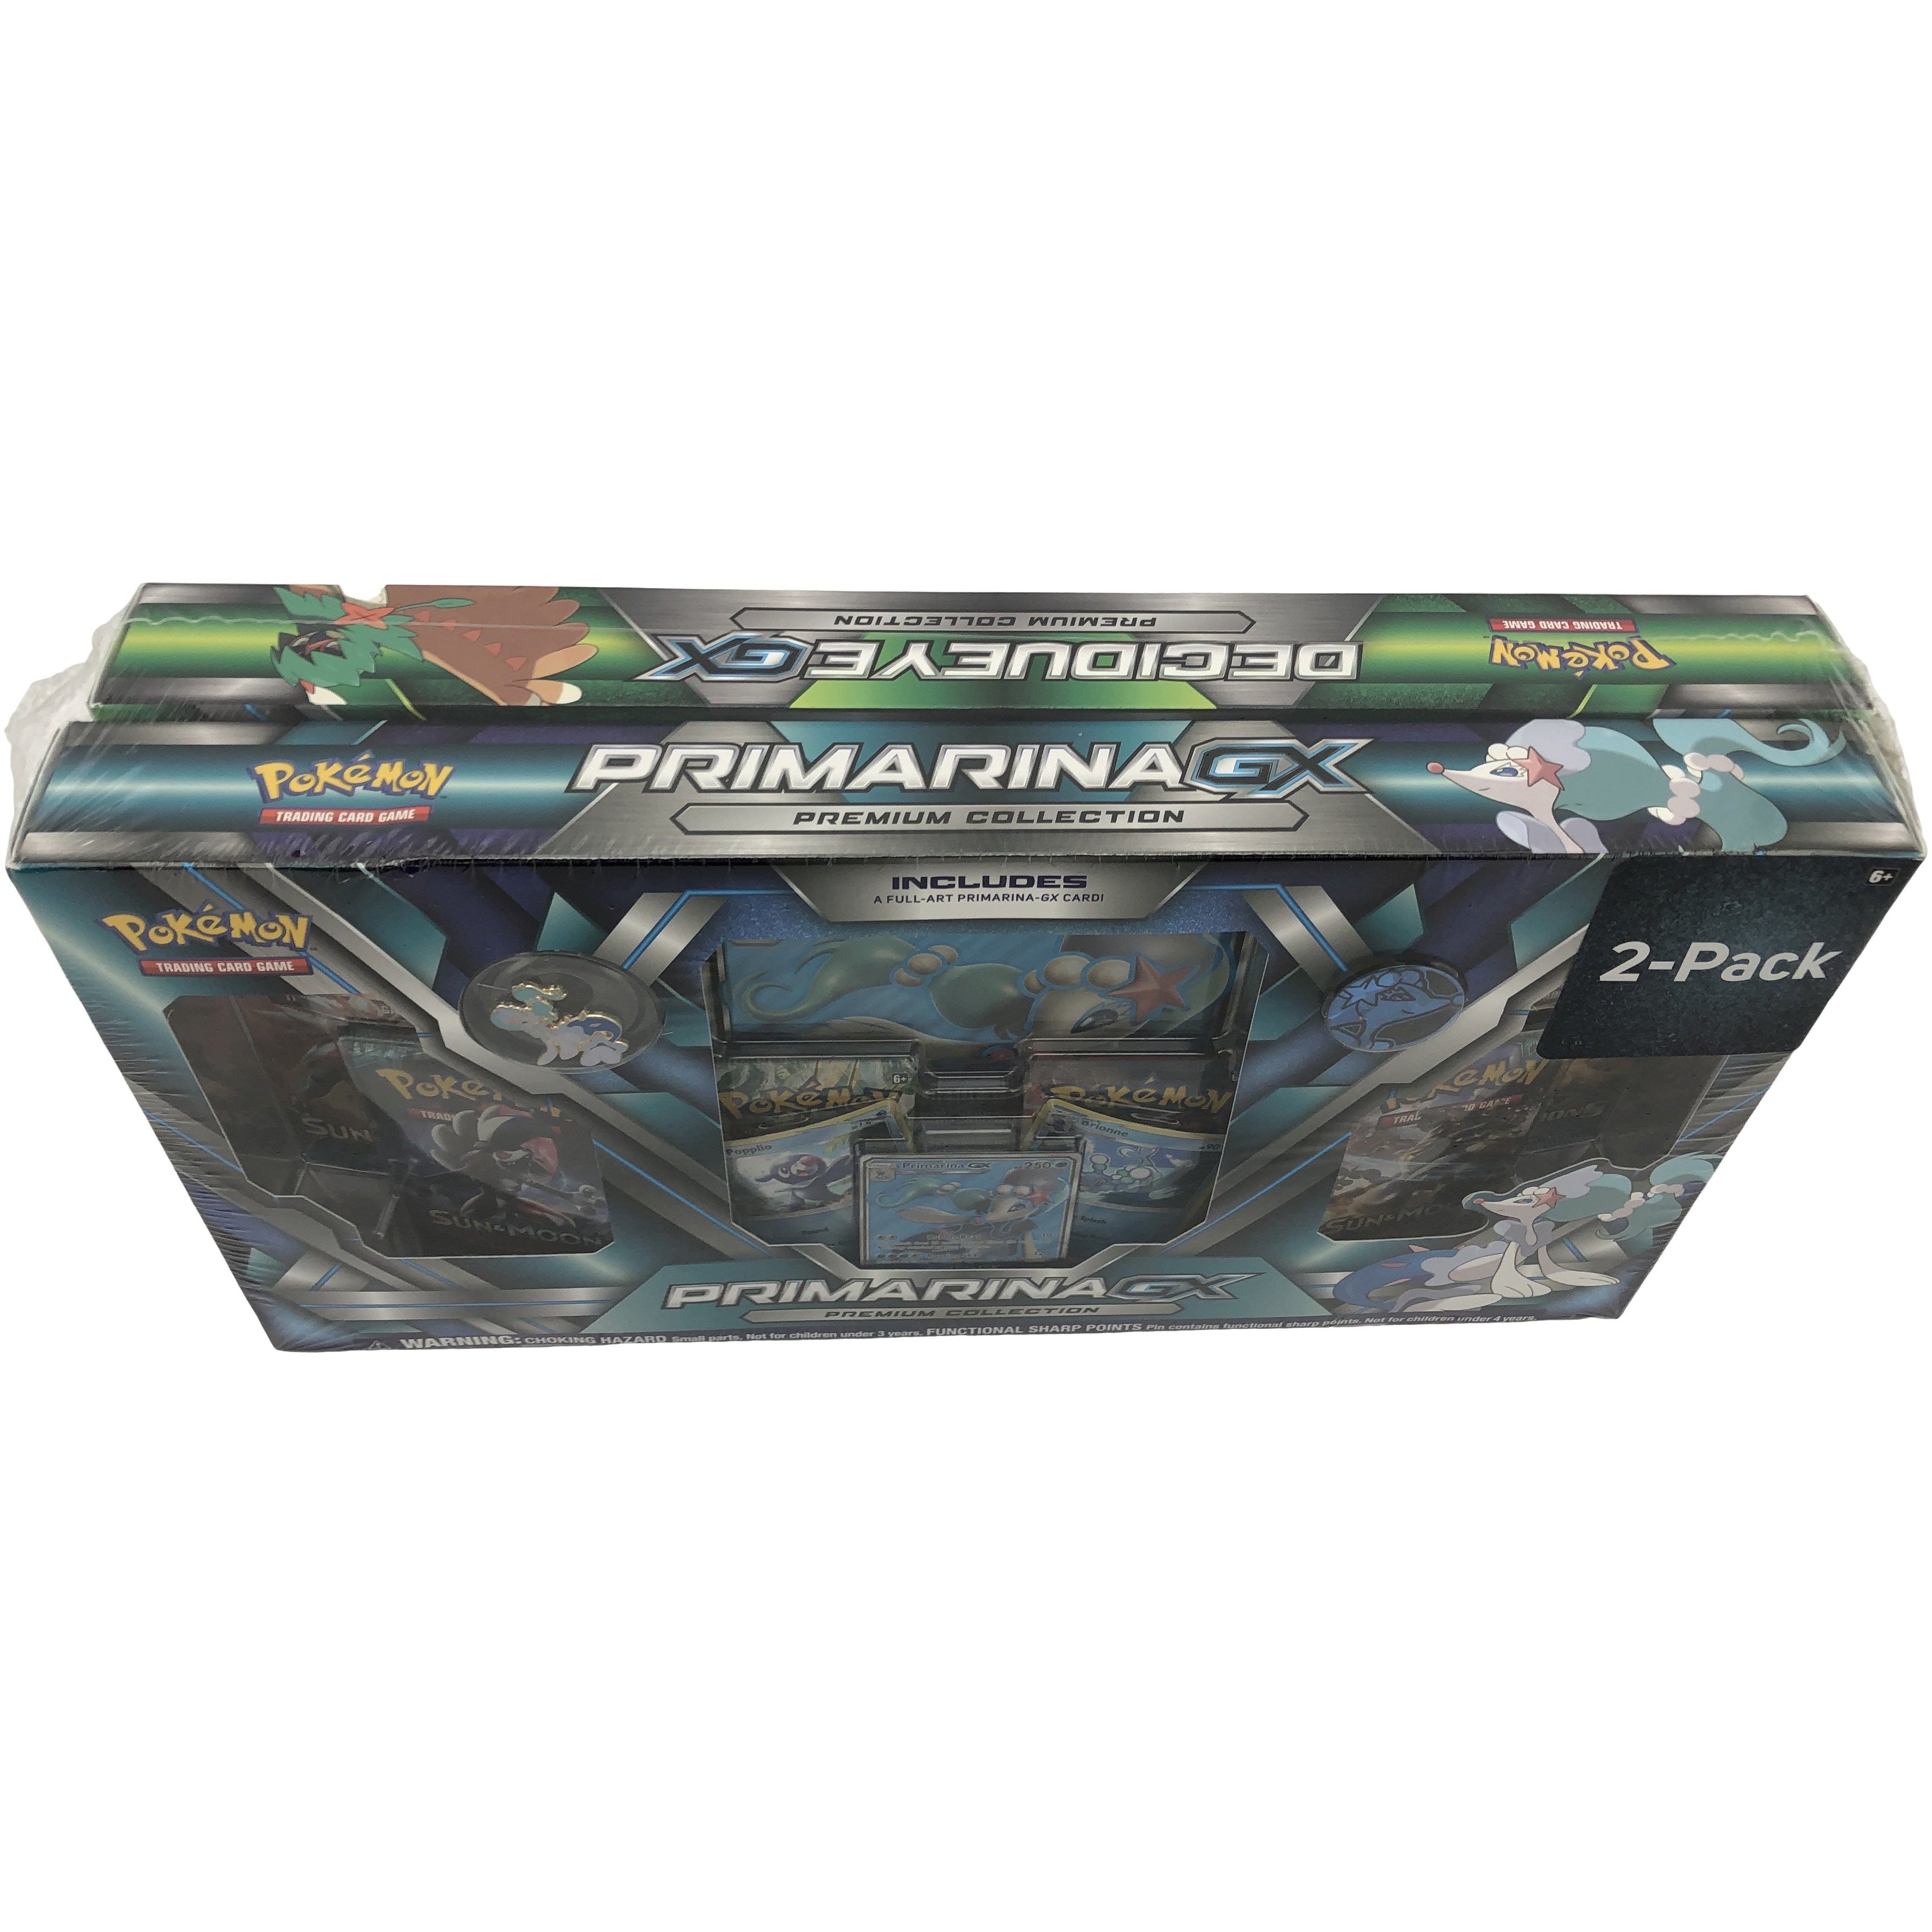 Pokemon Premium trading card box set in a pack of 2